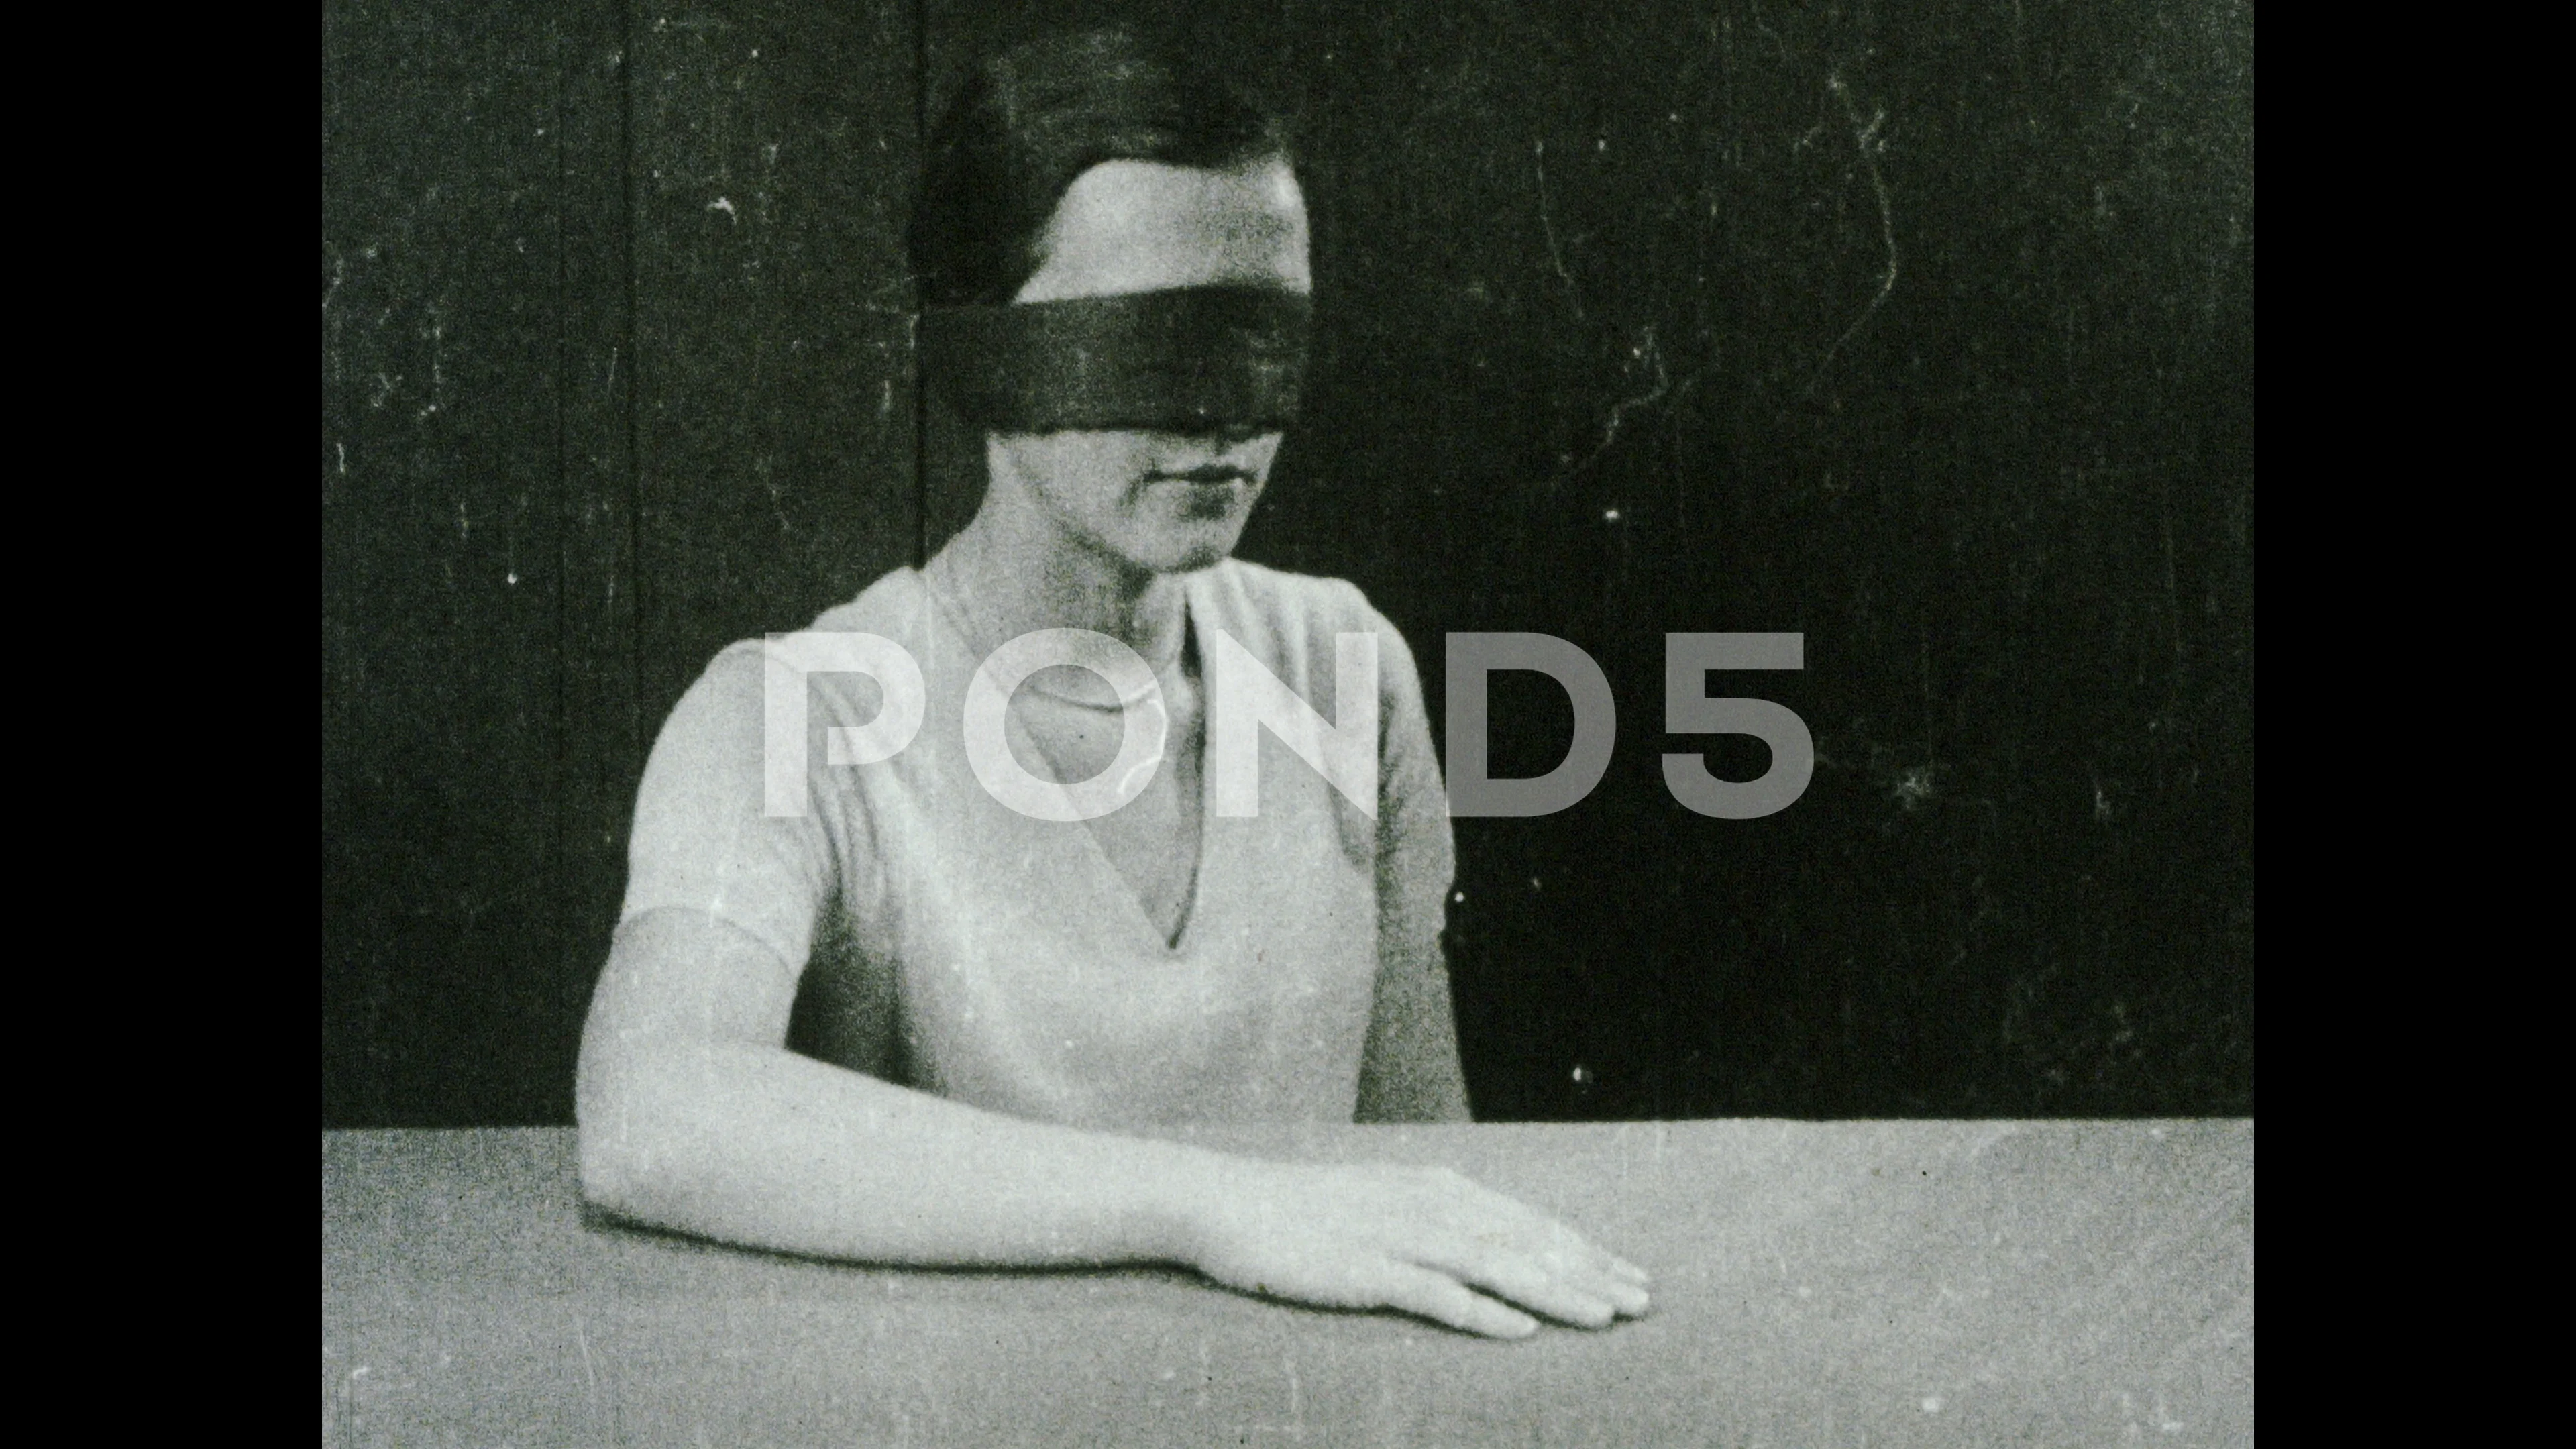 blindfolded woman sitting at a table - SuperStock